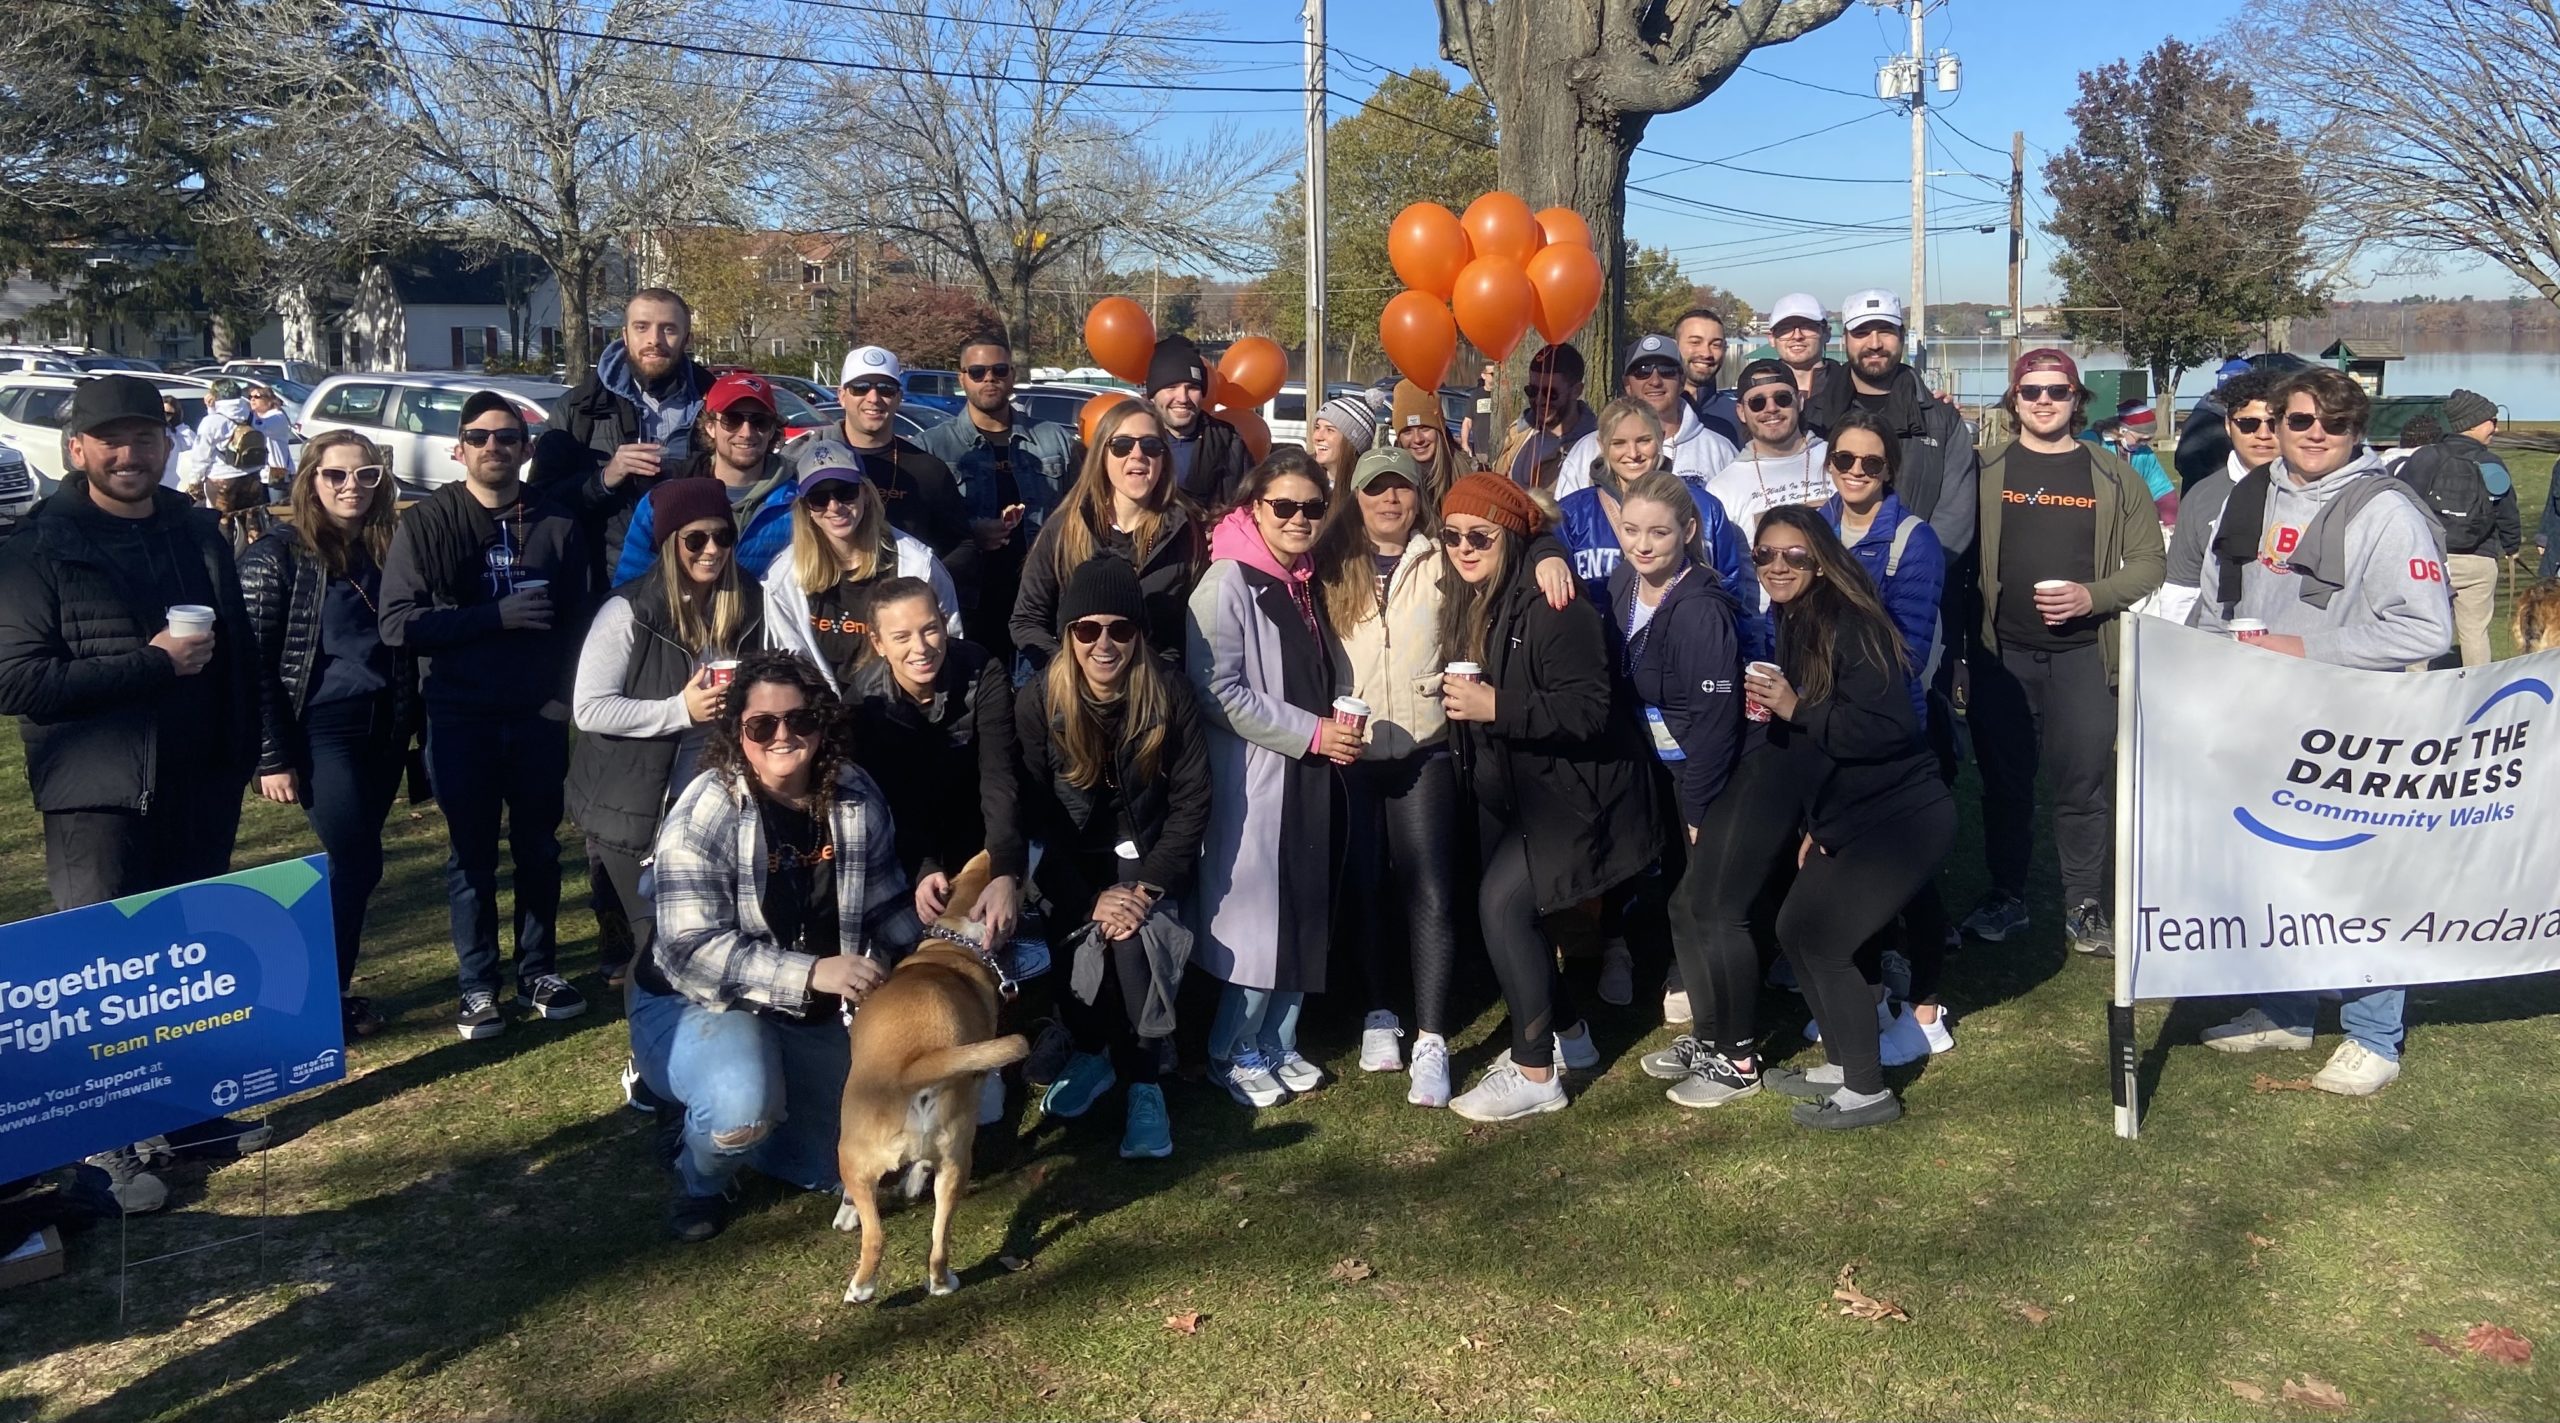 A group of Reveneer employees participating in the Out of Darkness Community Walk